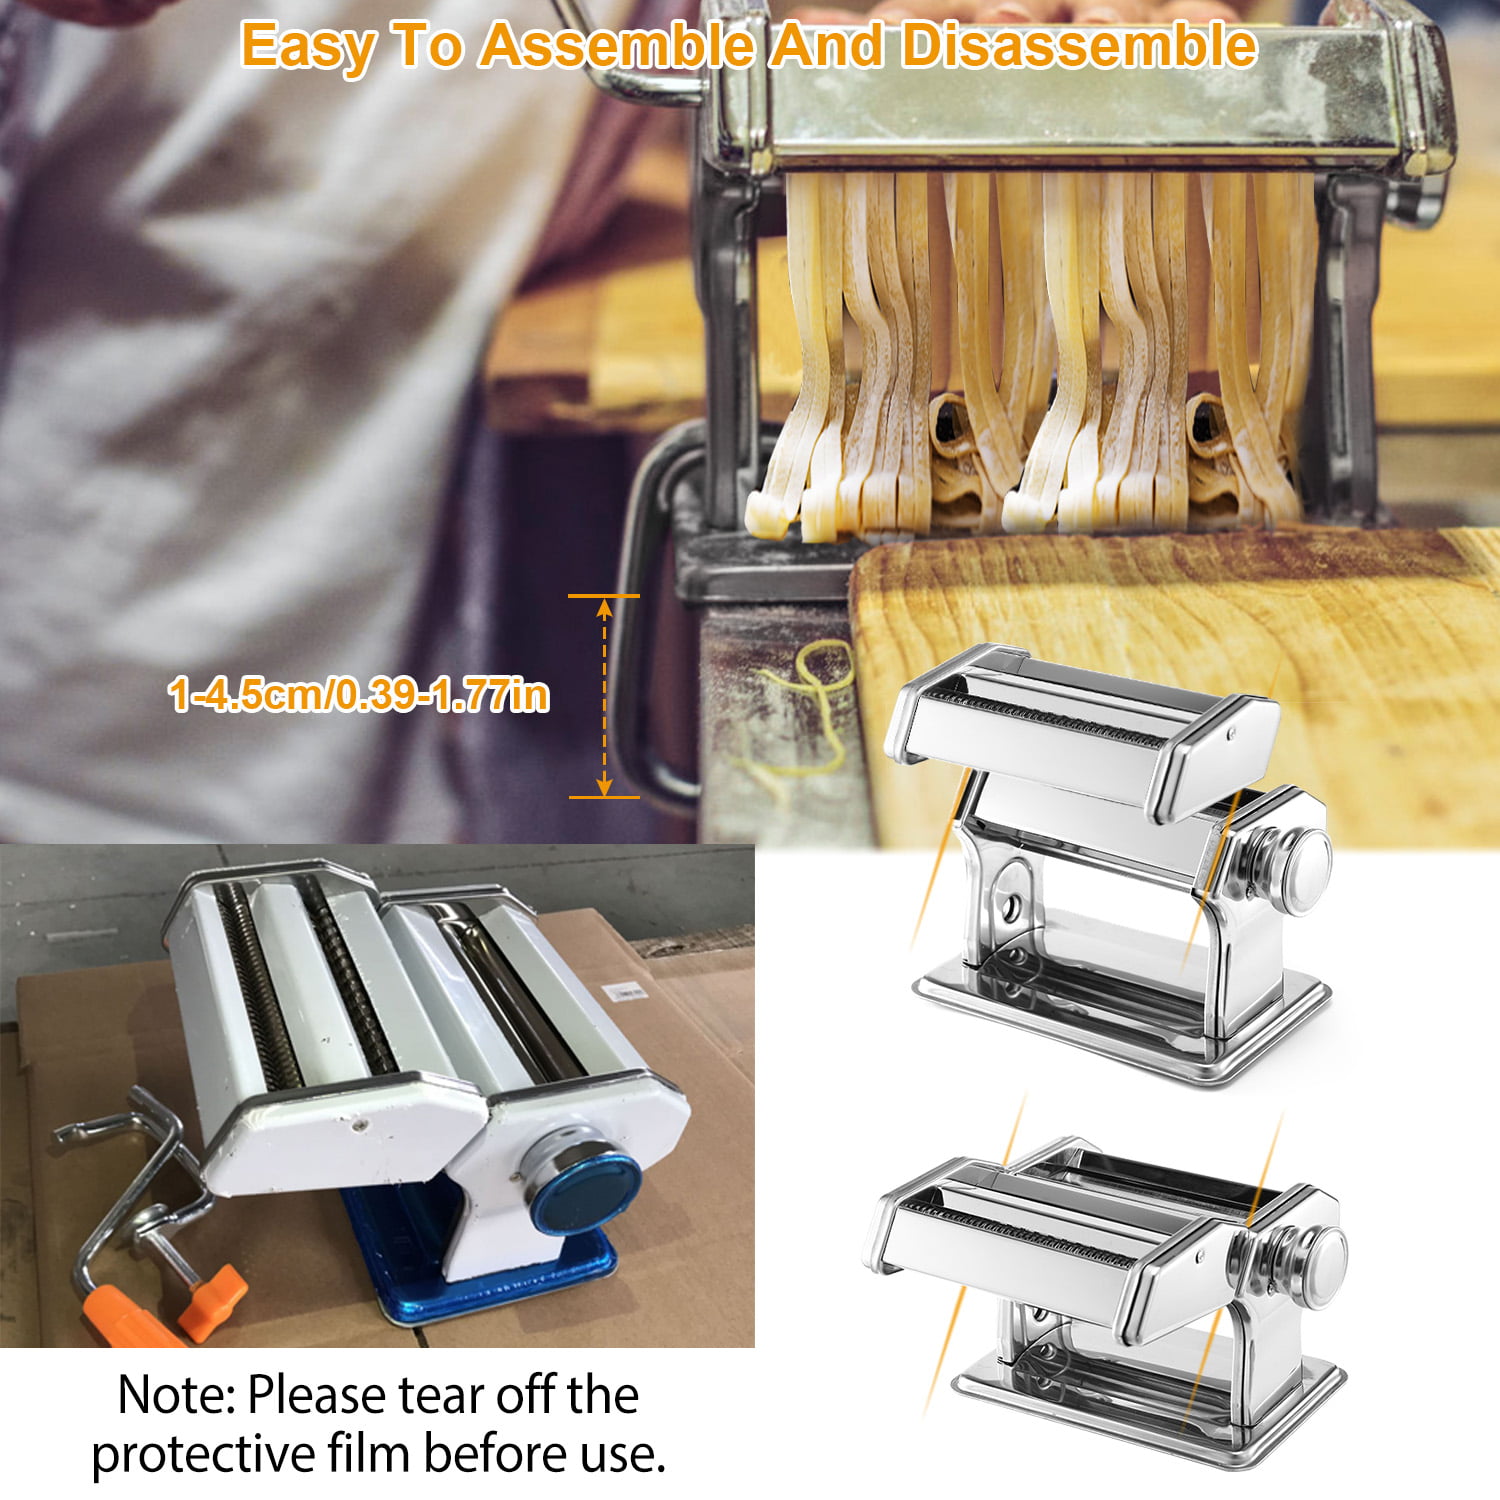 Pasta Maker Machine, Fondrun Pasta Roller Maker Stainless Steel Manual Pasta  Machine with 8 Adjustable Thickness Settings, 2 Noodle Cutter, Suit for  Homemade Spaghetti, Fettuccini, Lasagna 